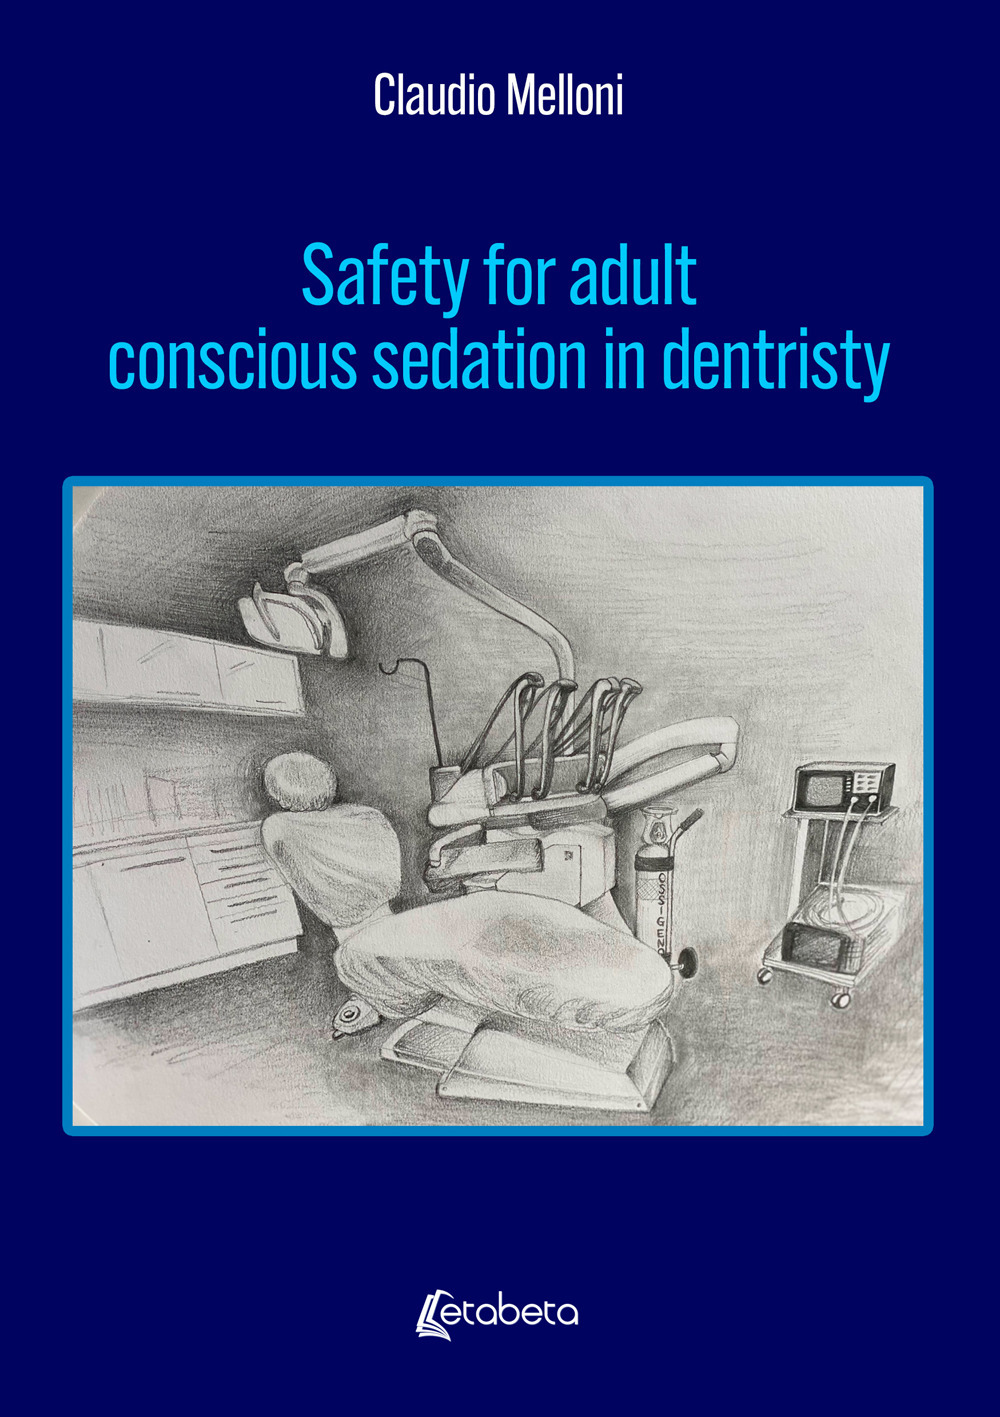 Safety for adult conscious sedation in dentristy